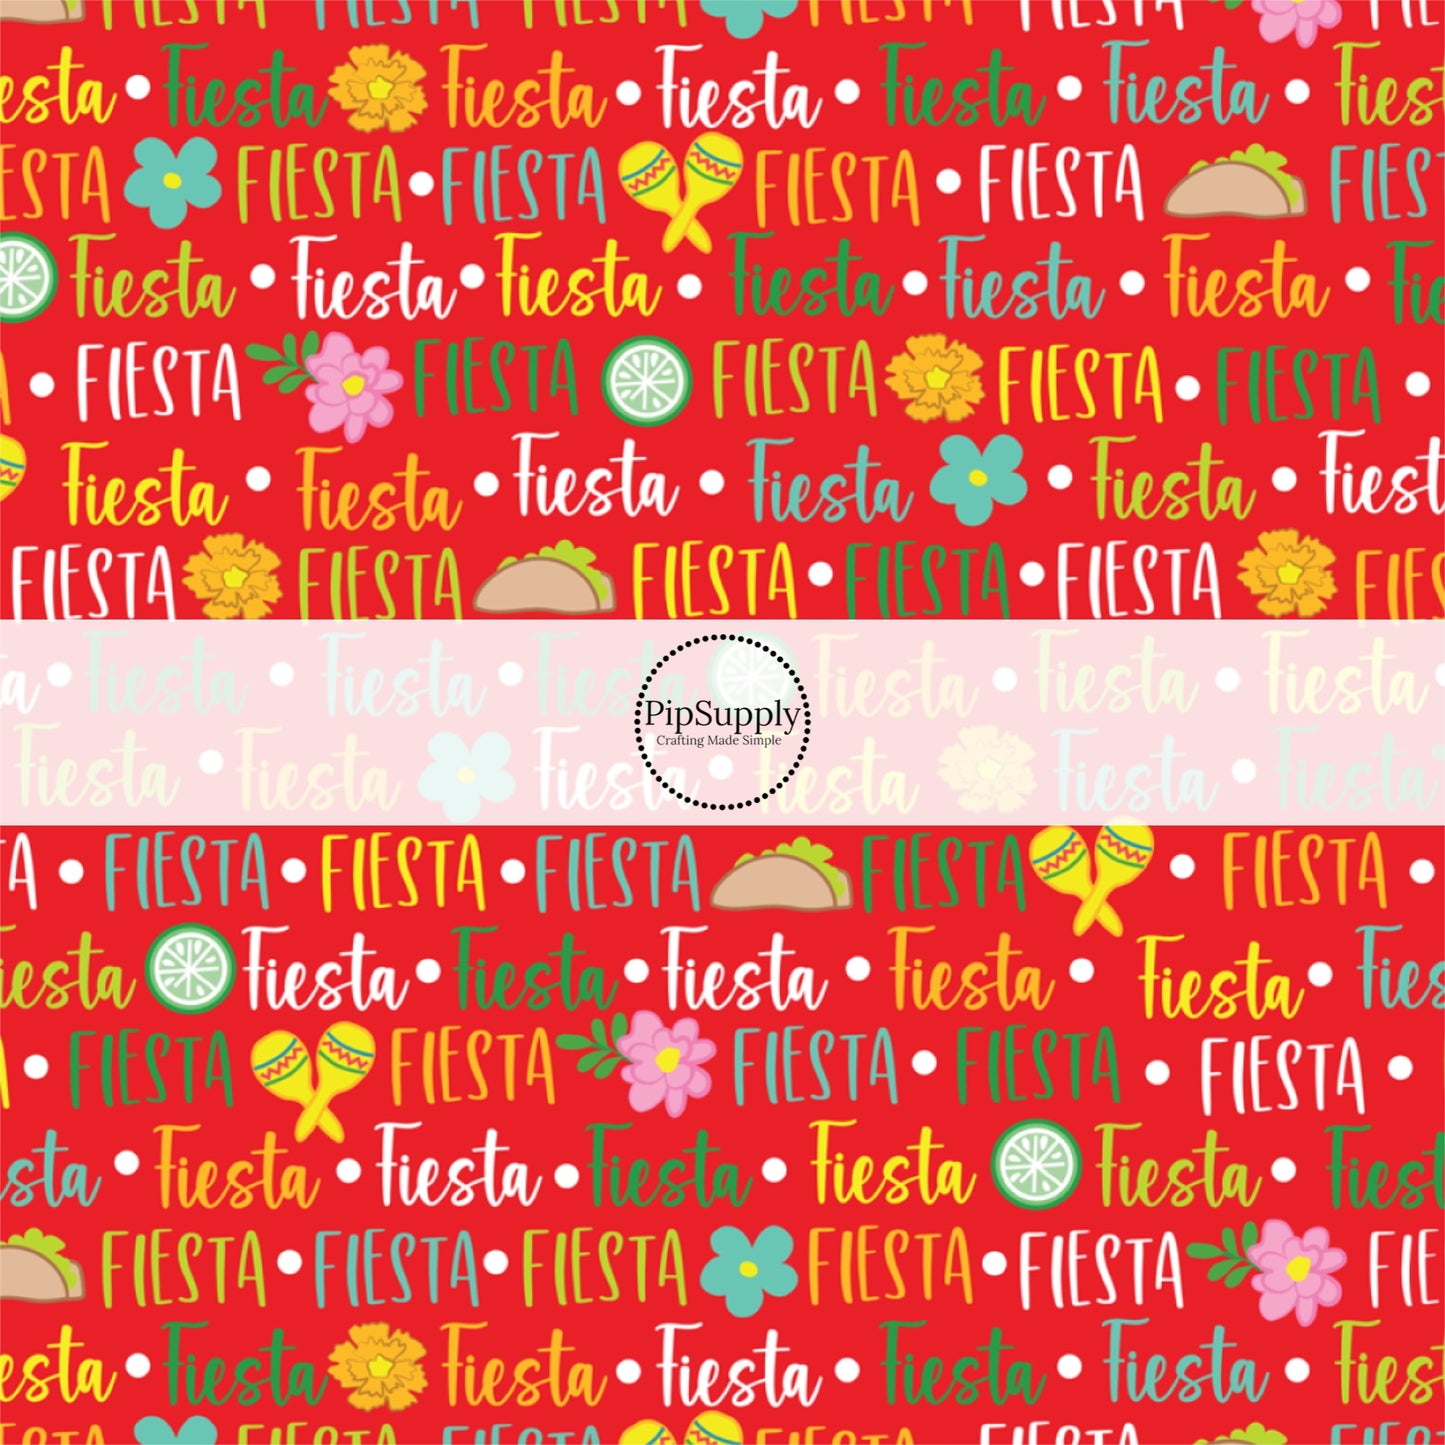 Fiesta, Taco, and Floral Patterned Red Fabric by the Yard.